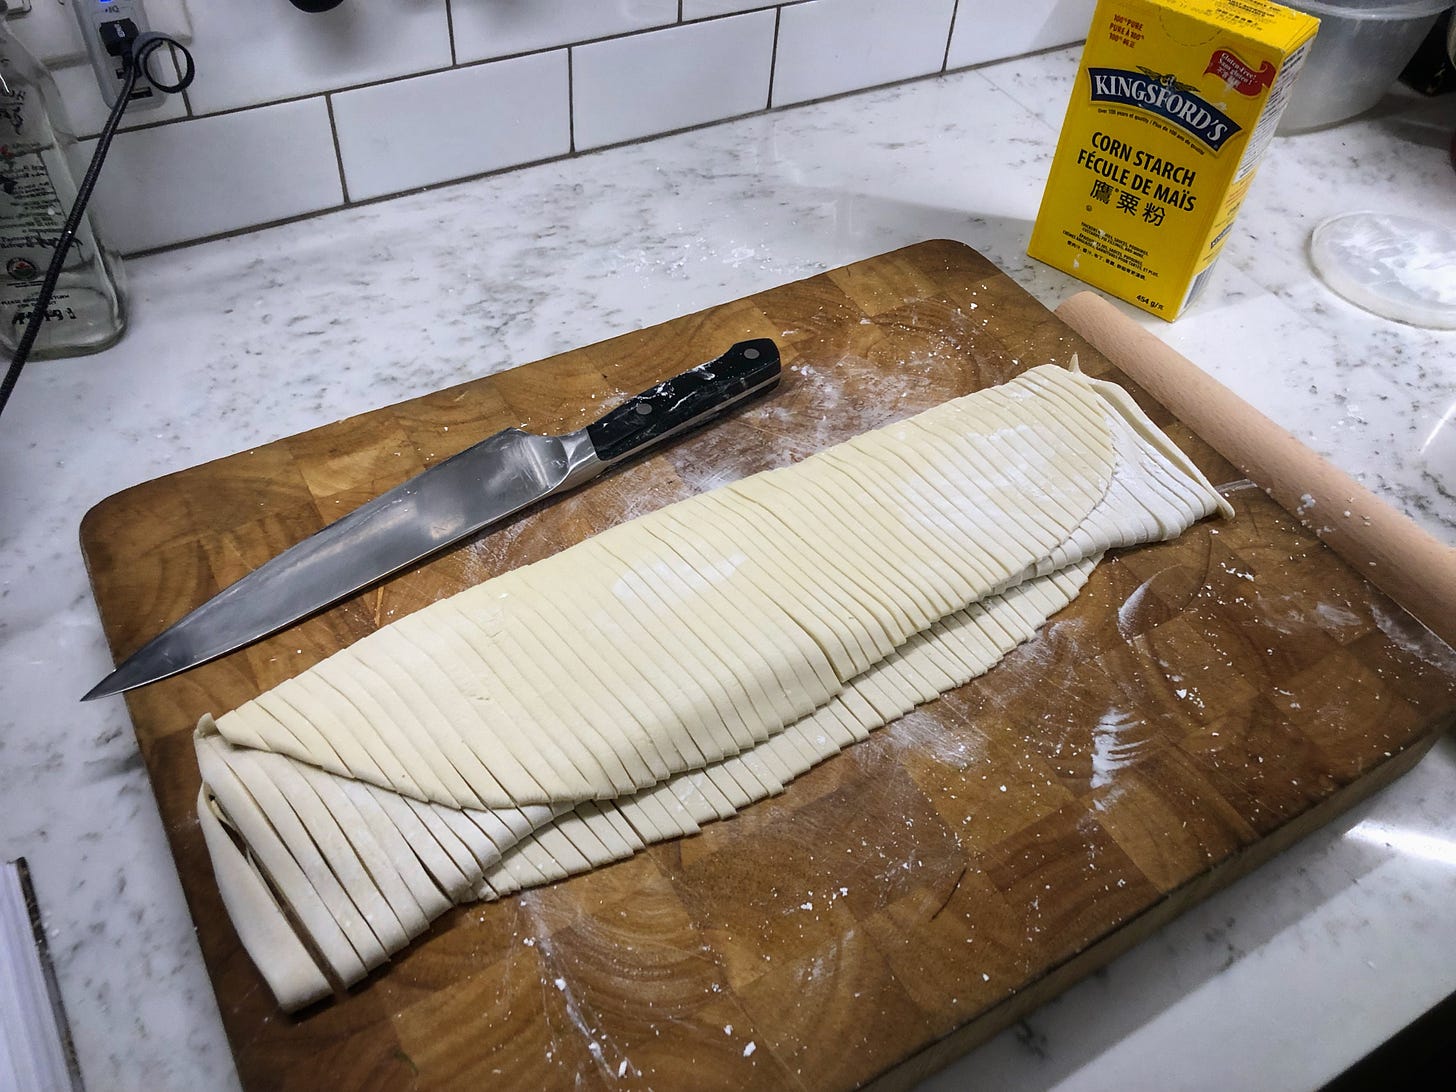 The folded dough sheet, cut into noodles and dusted heavily in corn starch